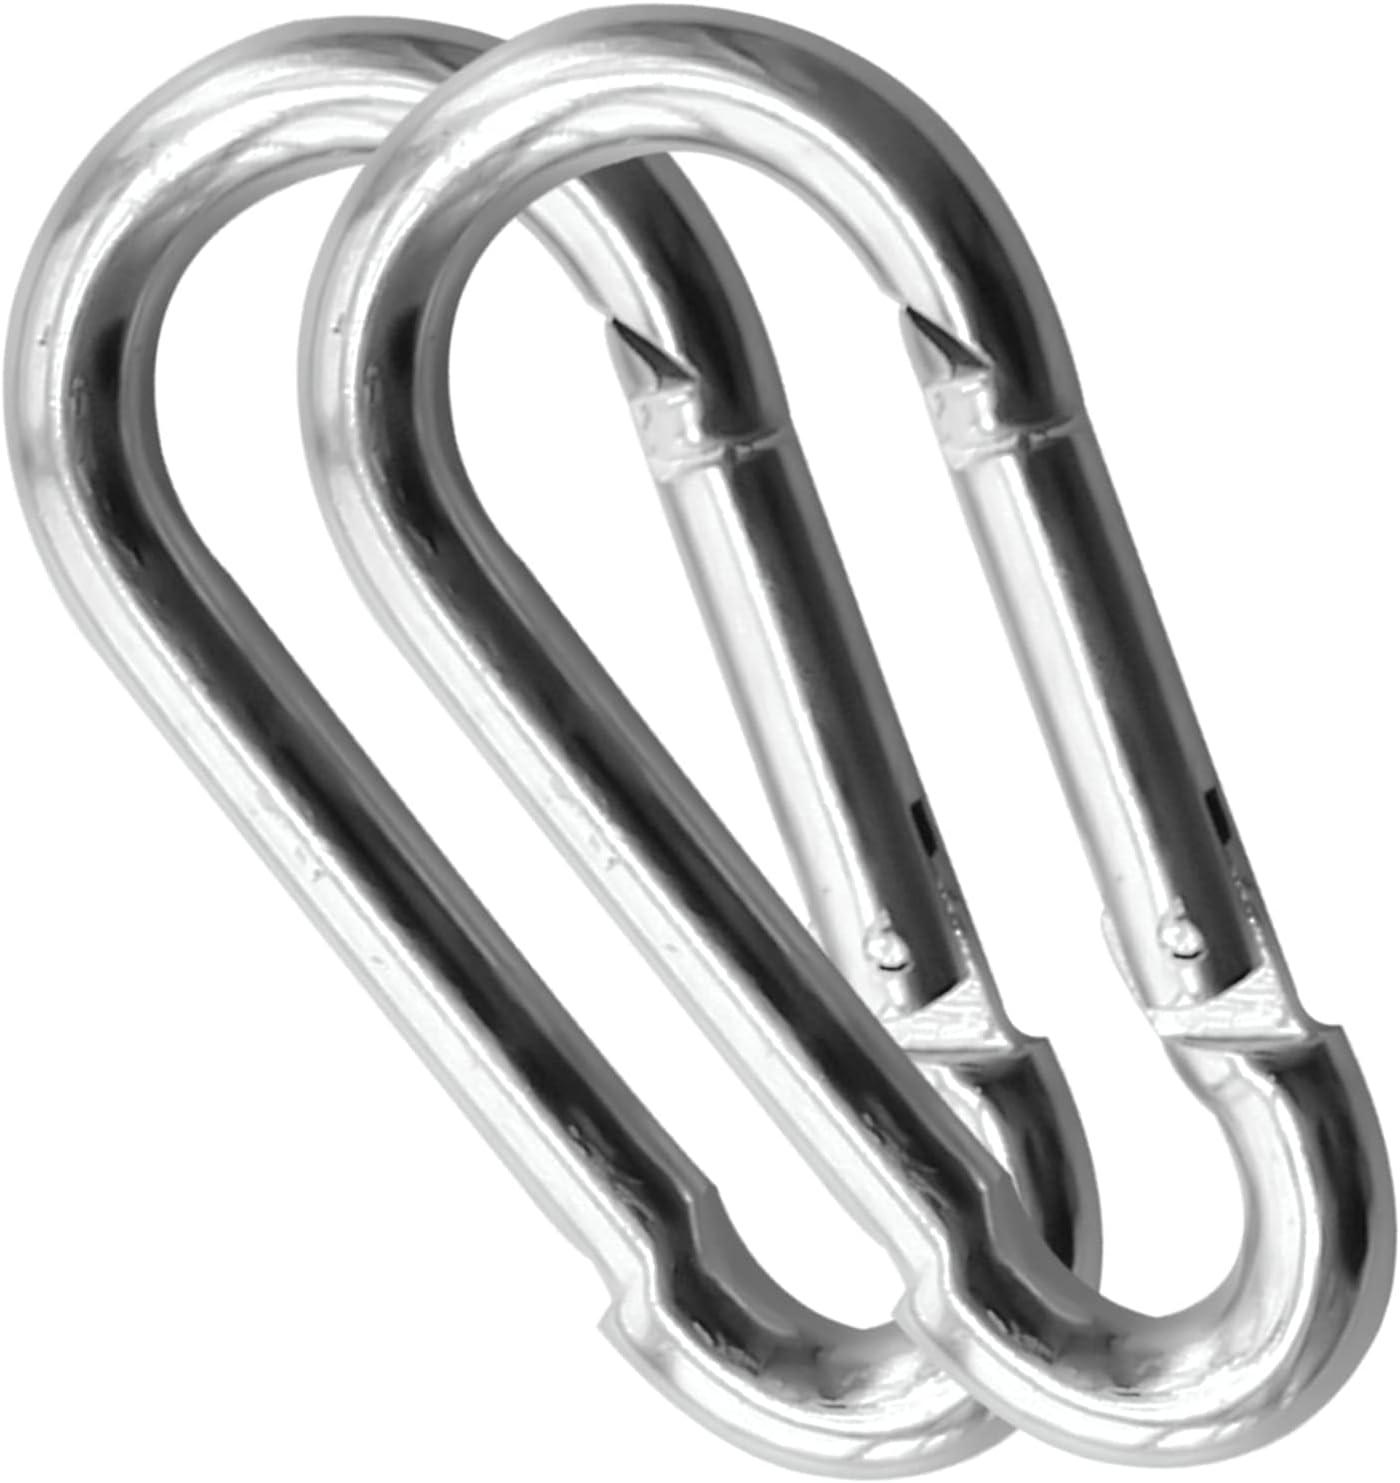 30Pack Heavy Duty Spring Snap Hooks 4Inch, 3/8 Carabiner Clips for